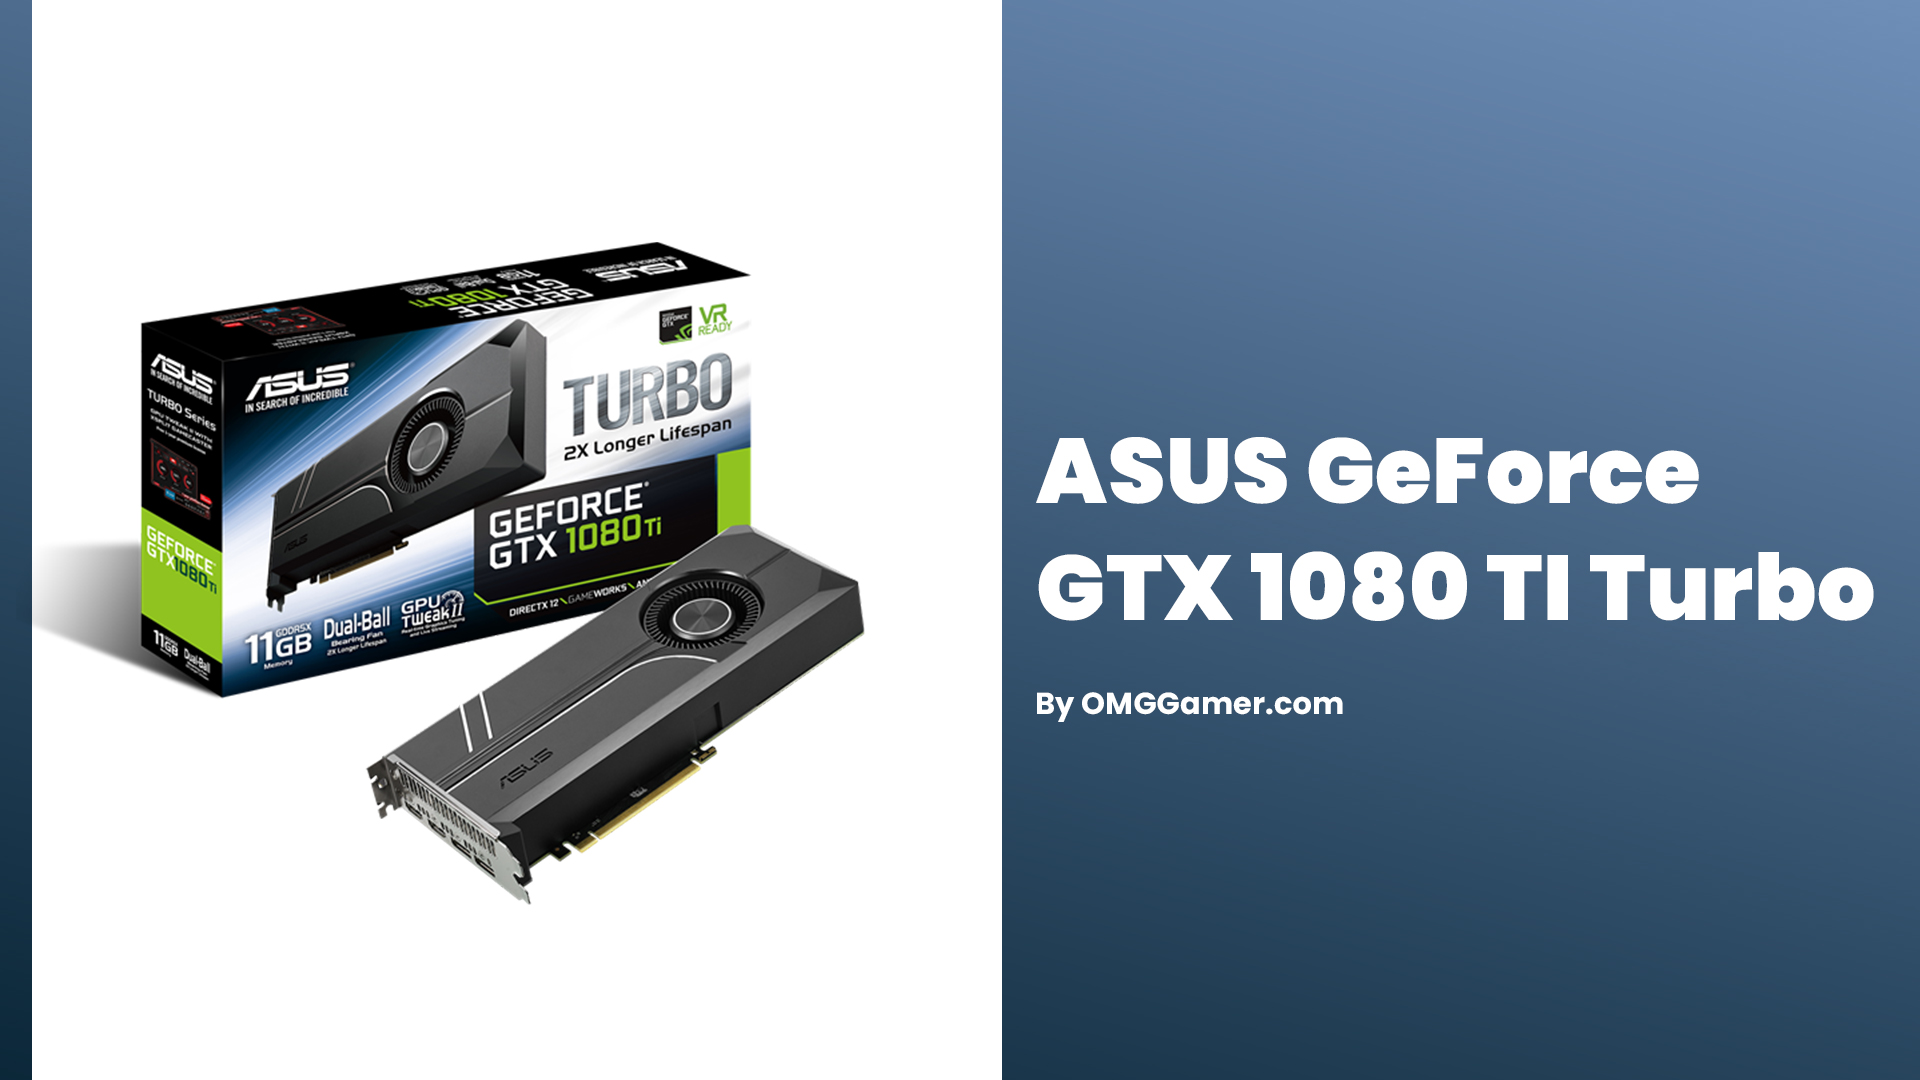 ASUS GeForce GTX 1080 TI Turbo: Cheapest 4K Graphics Cards